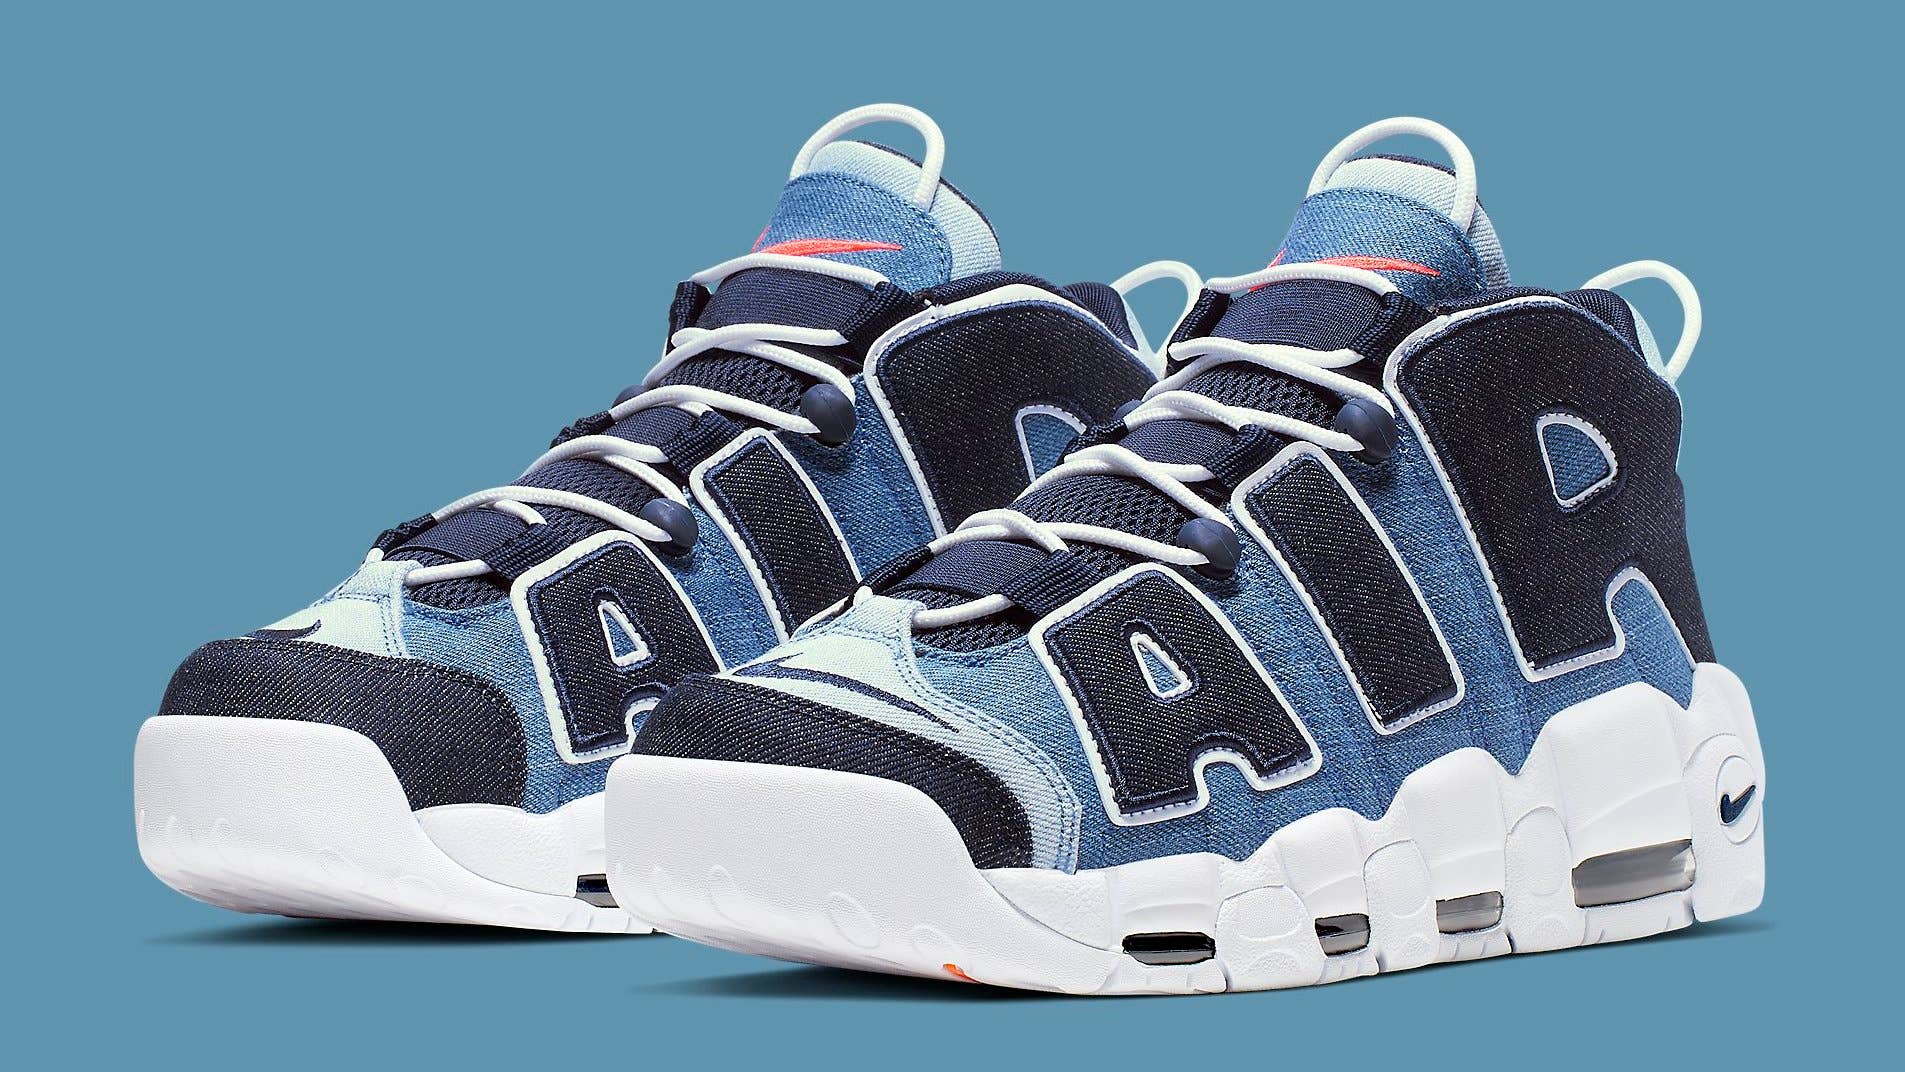 A Better Look at the Nike Air More Uptempo Complex